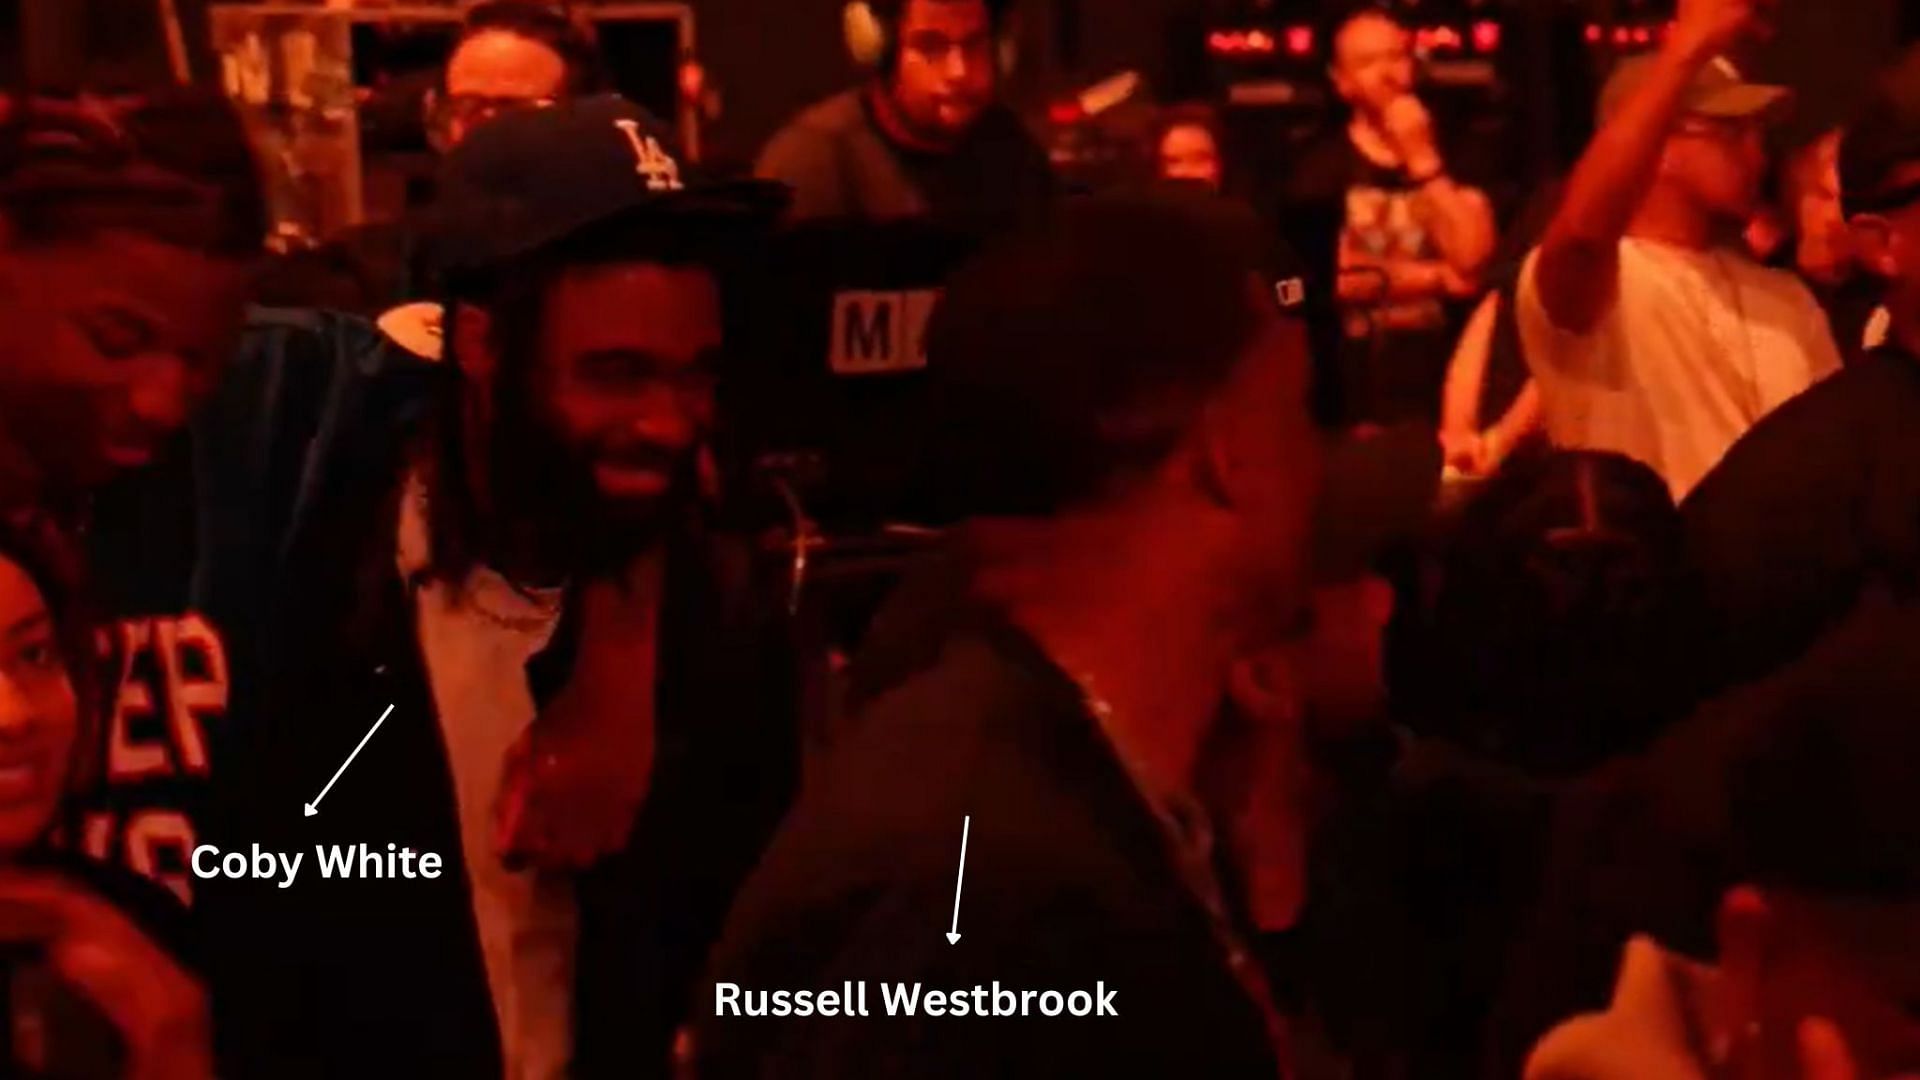 Russell Westbrook and Coby White attend the concert